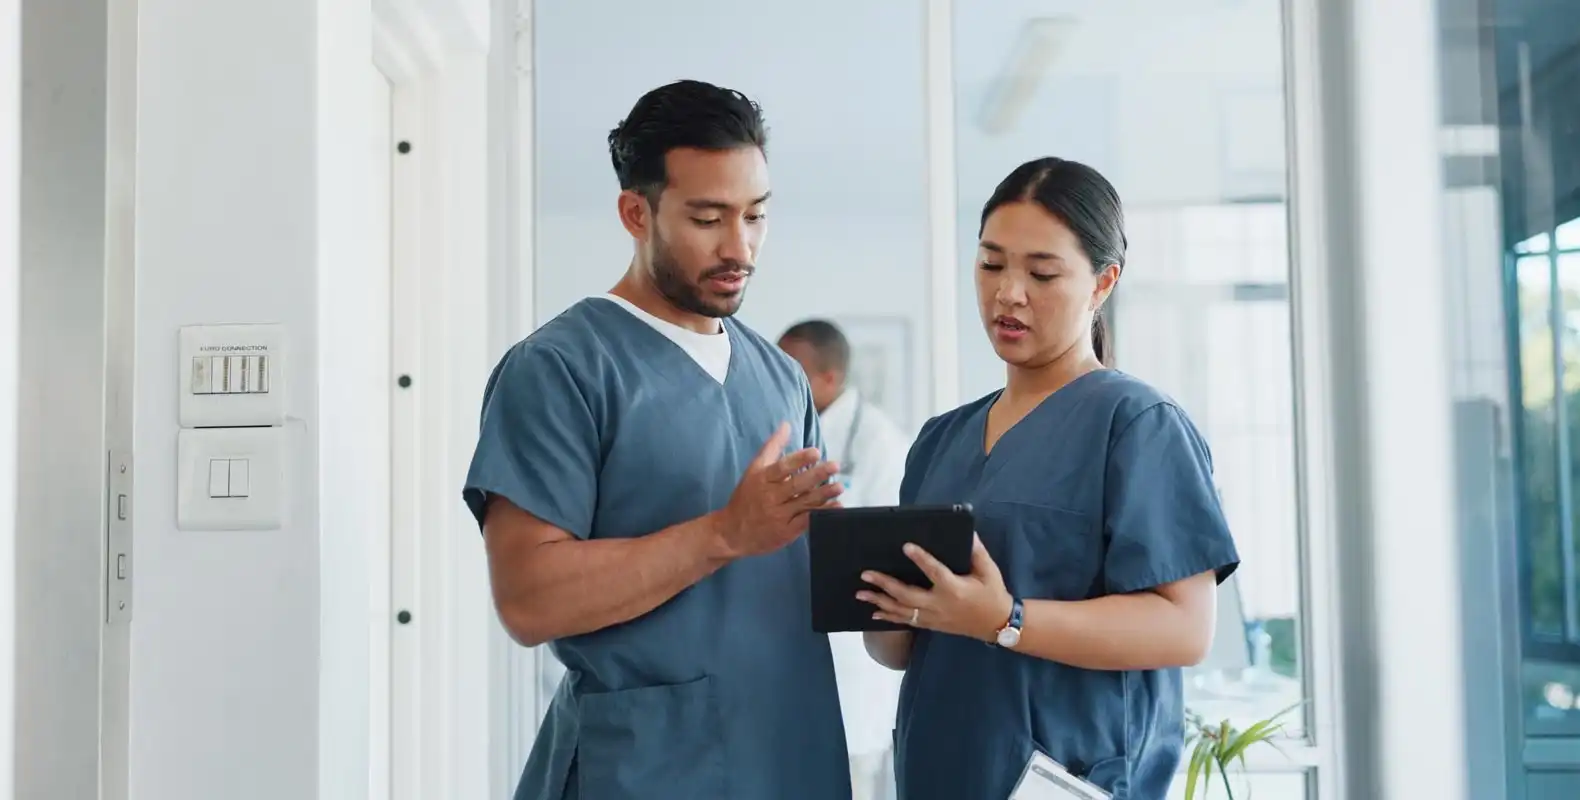 Two healthcare professionals looking at tablet in healthcare environment